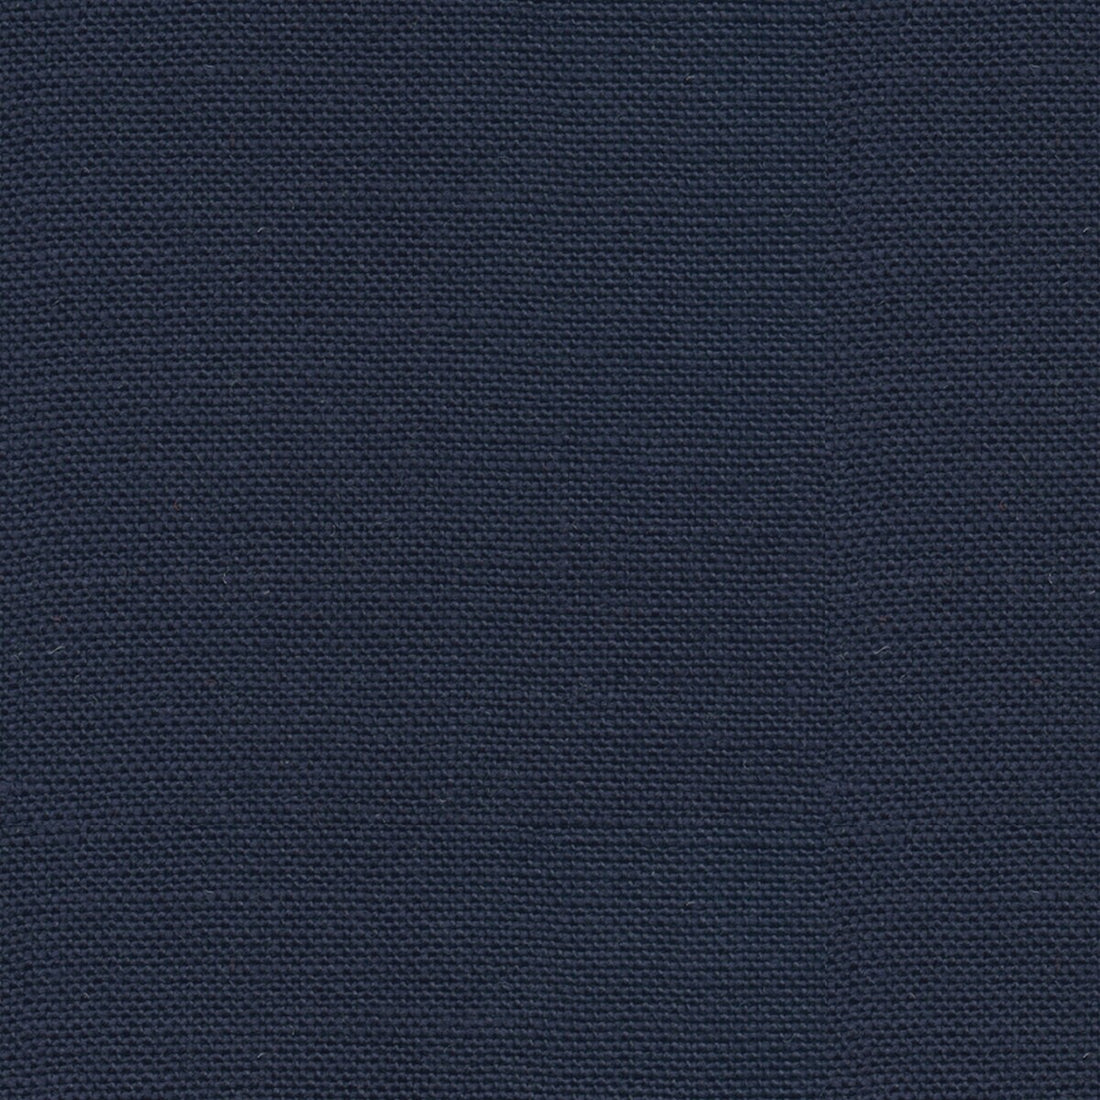 Lea fabric in indigo color - pattern J0337.680.0 - by G P &amp; J Baker in the Crayford collection